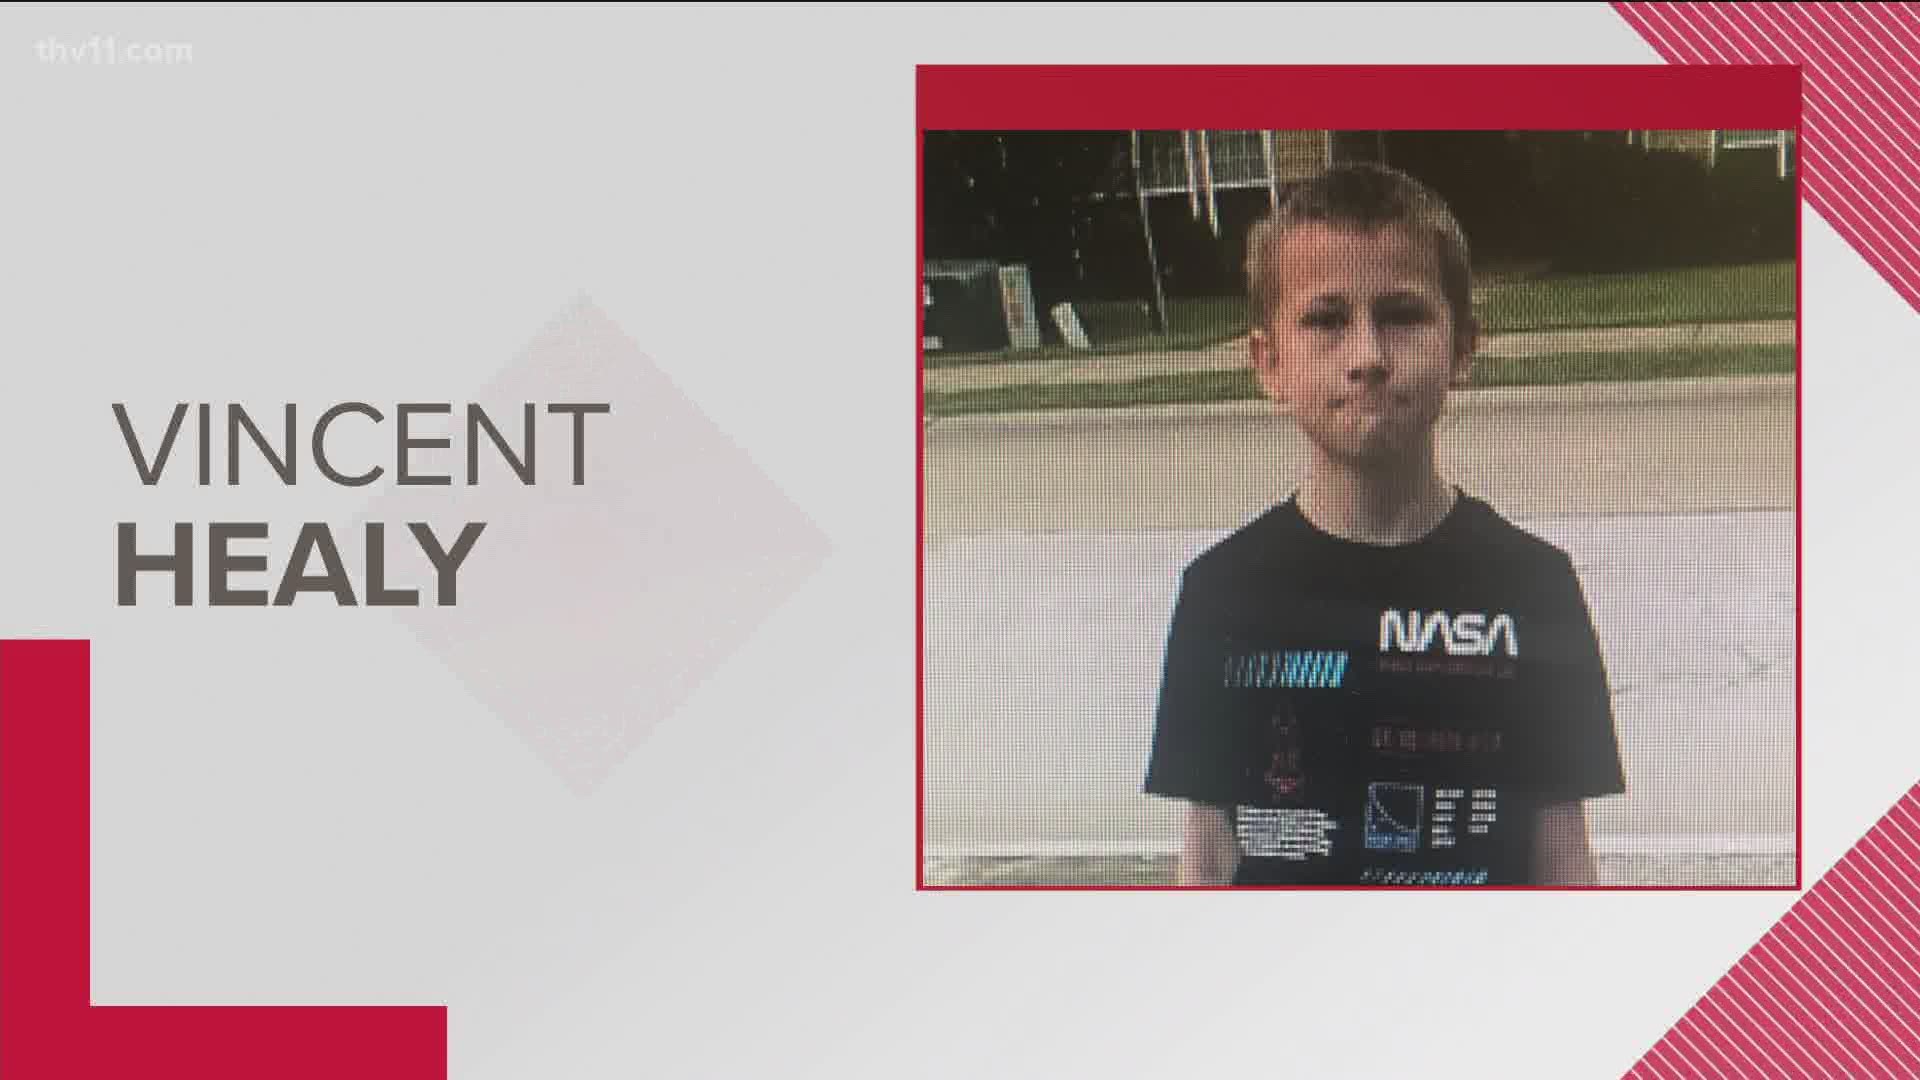 Police in Cabot are looking for 10-year-old Vincent Healy after he ran away after he got of the bus Tuesday.